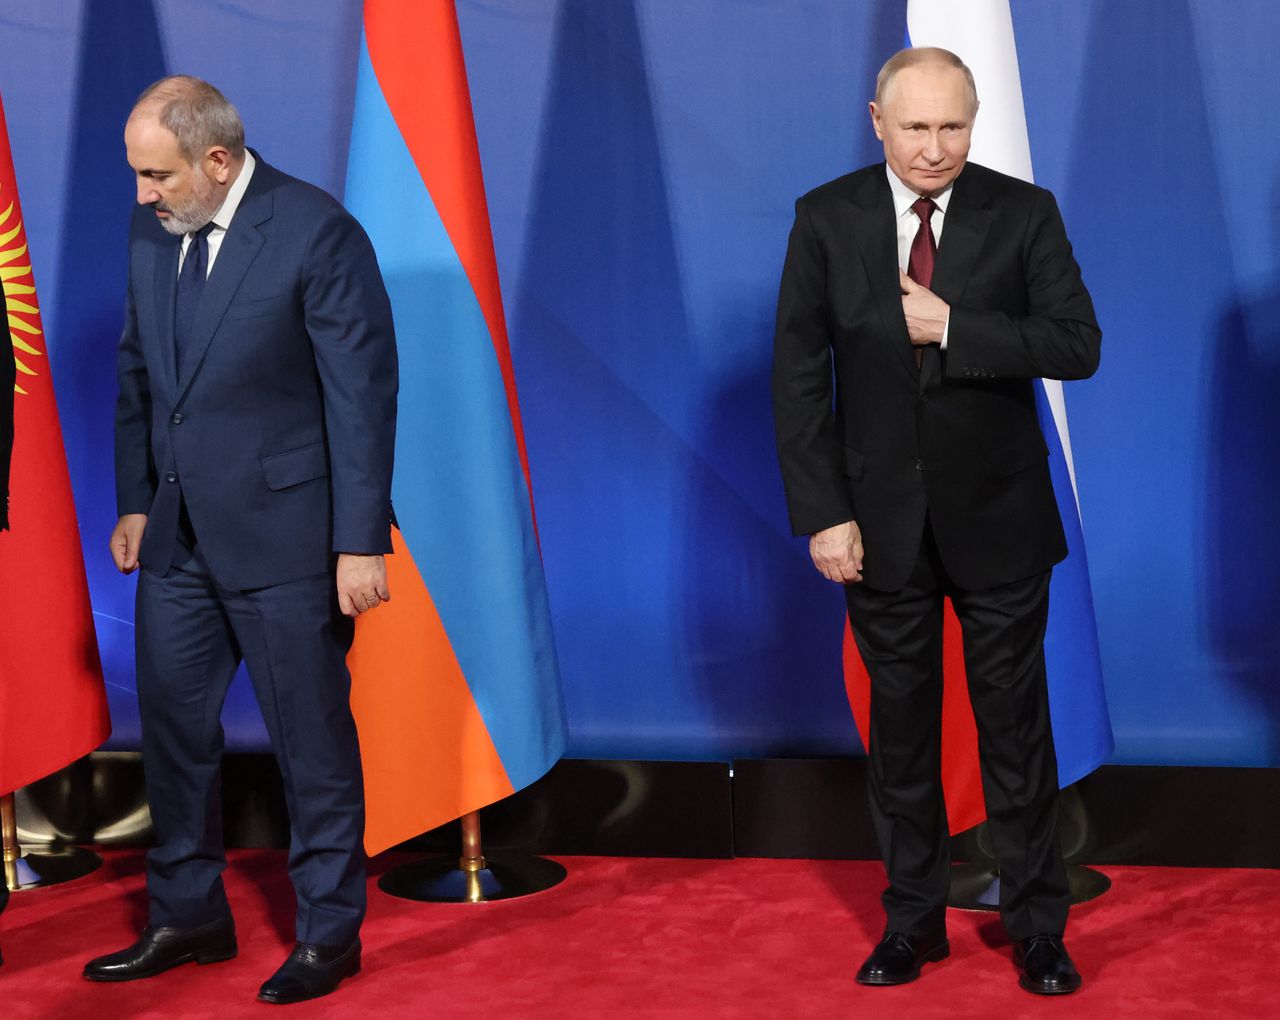 Armenia is considering leaving the Collective Security Treaty Organization led by Russia.